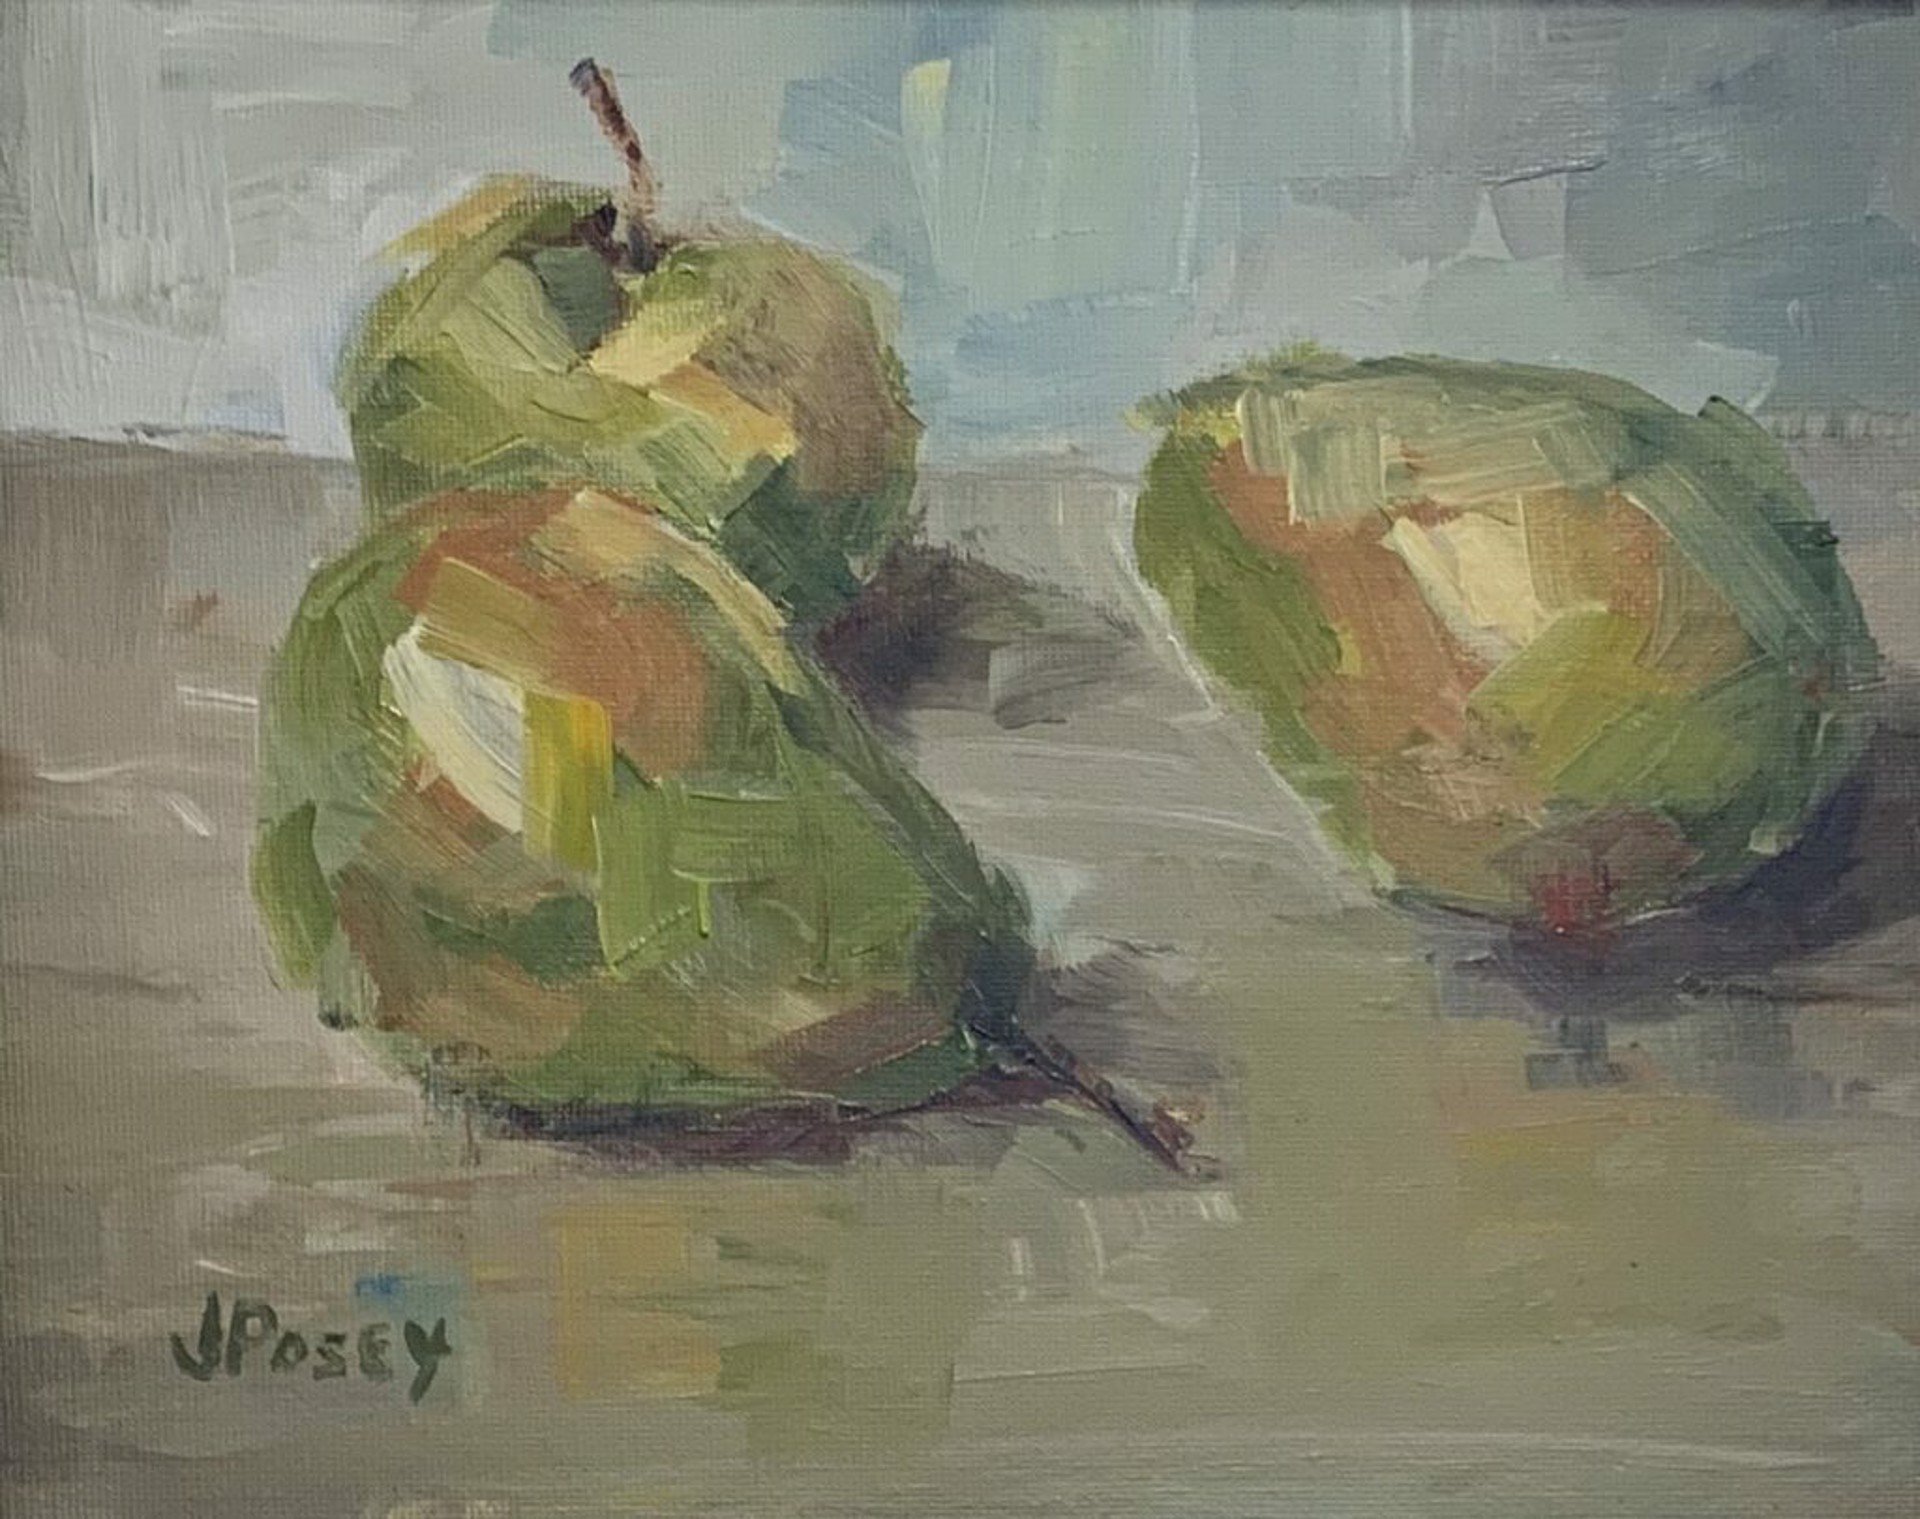 Pears 1 by Jeany Posey